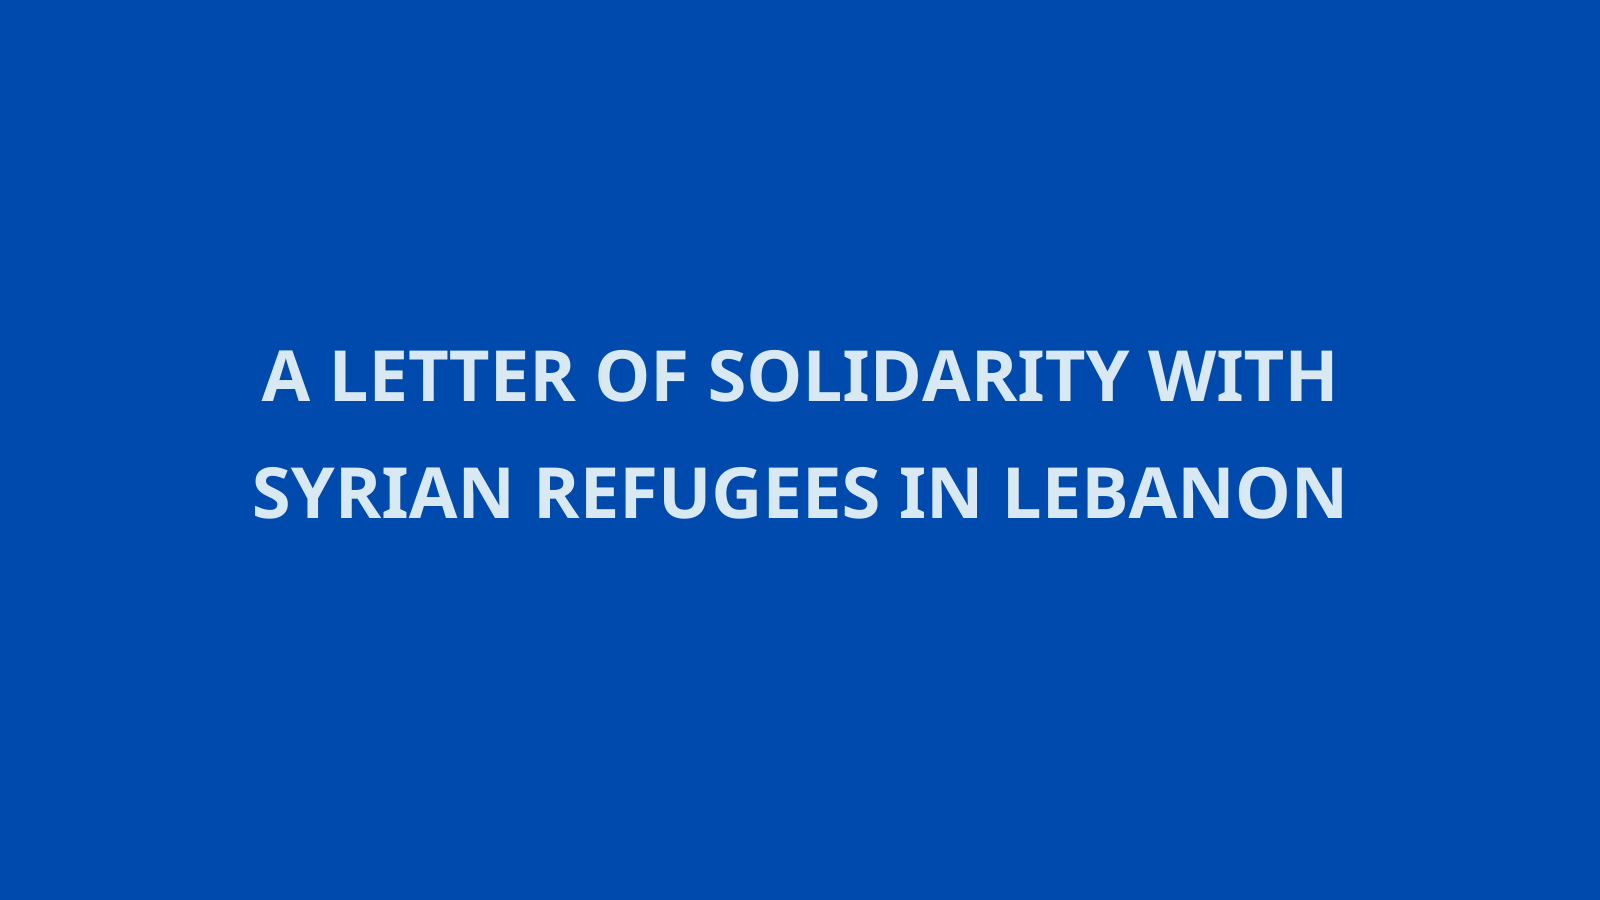 A Letter of Solidarity with Syrian Refugees in Lebanon